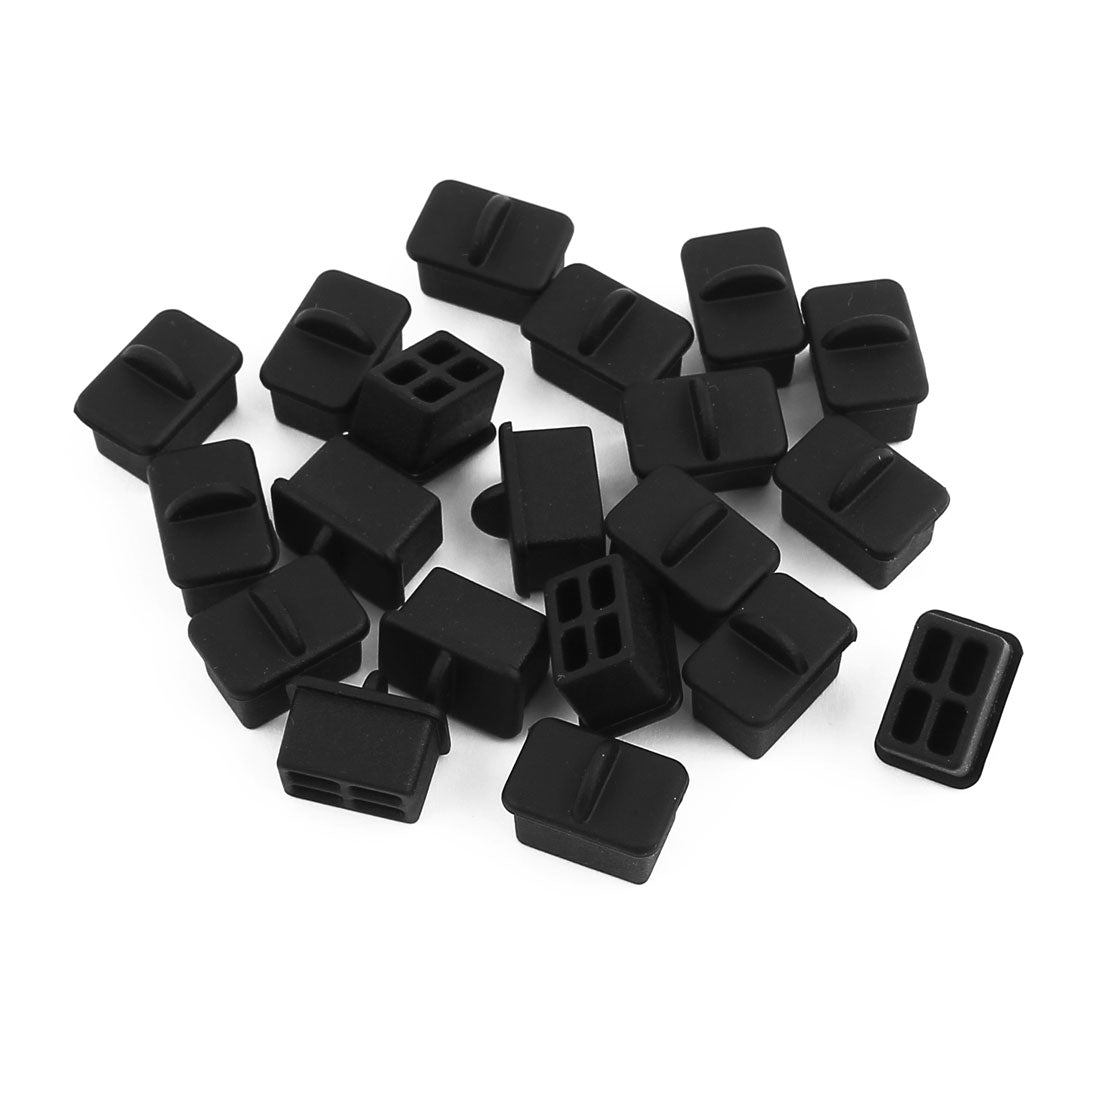 uxcell Uxcell 20Pcs SFP-A Black Silicone Anti-dust Stopper/Plug for Protect Data Port Of Devices